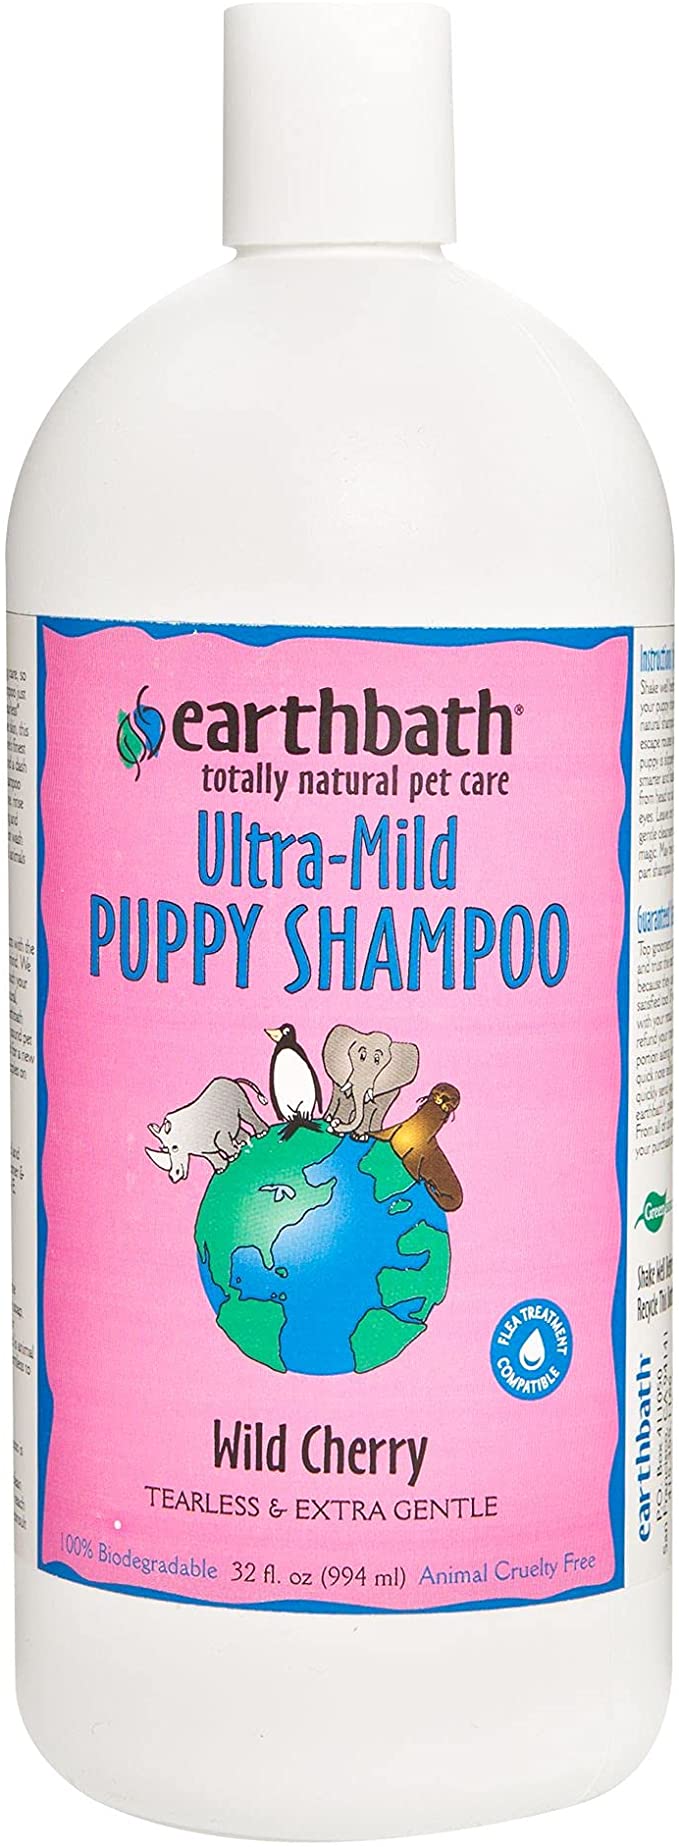 Earthbath Ultra-Mild Puppy Shampoo and Conditioner, Wild Cherry, 32oz " Tearless & Extra Gentle " Made in USA